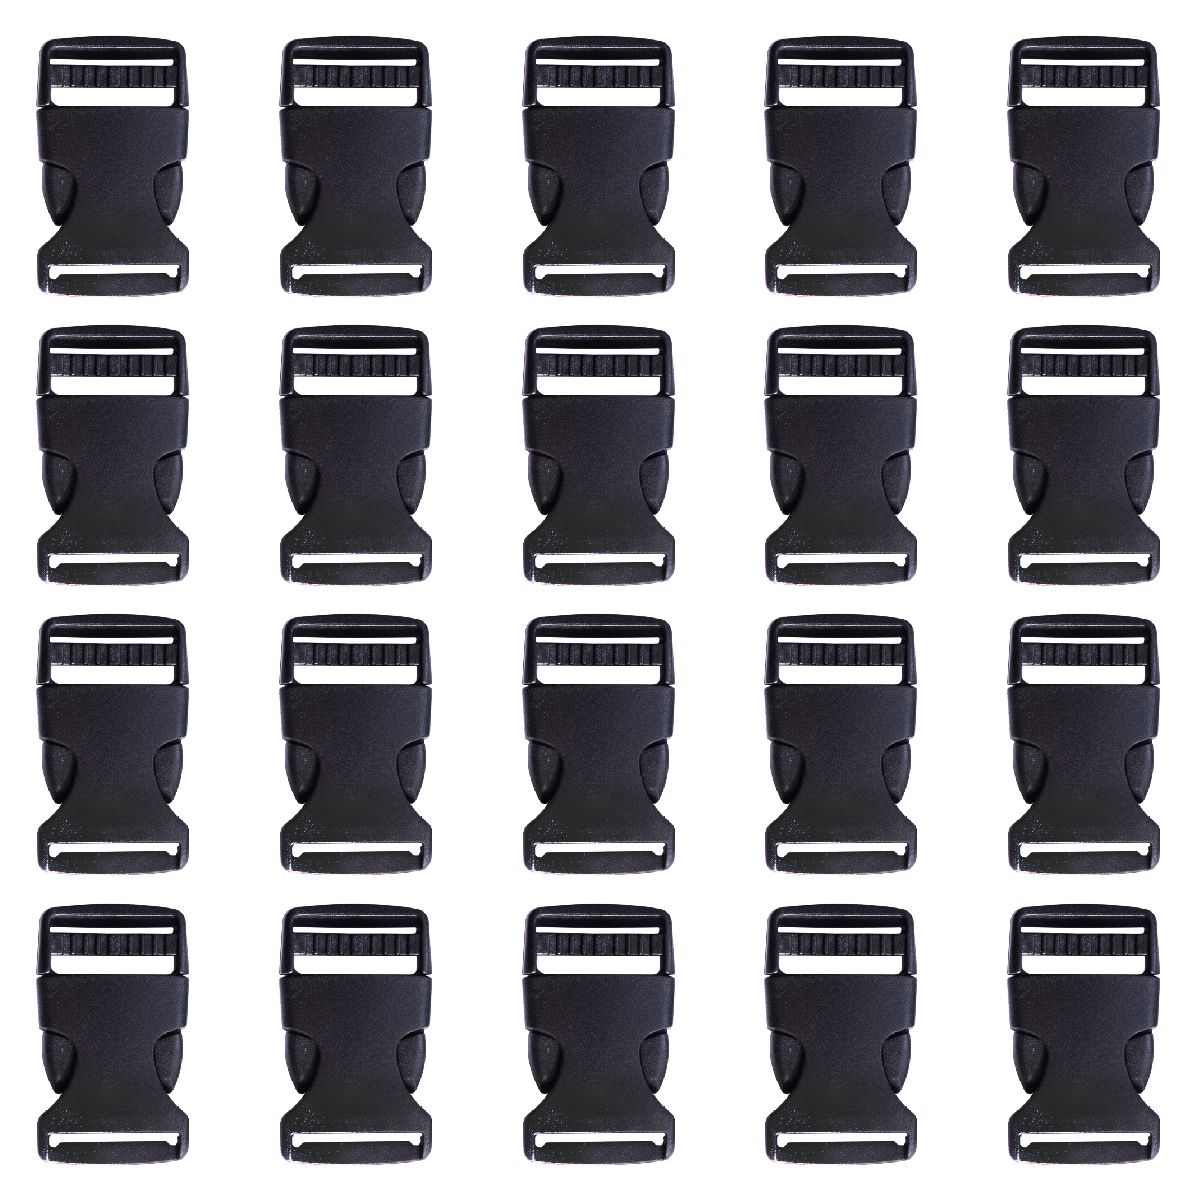 BEADNOVA Plastic Buckle Kit Nylon Strap with Buckle 12 Sets Quick Release Buckle 1 Inch and Tri-Glide Slides with 11 Yards Nylon Strapping 1 Inch Black 